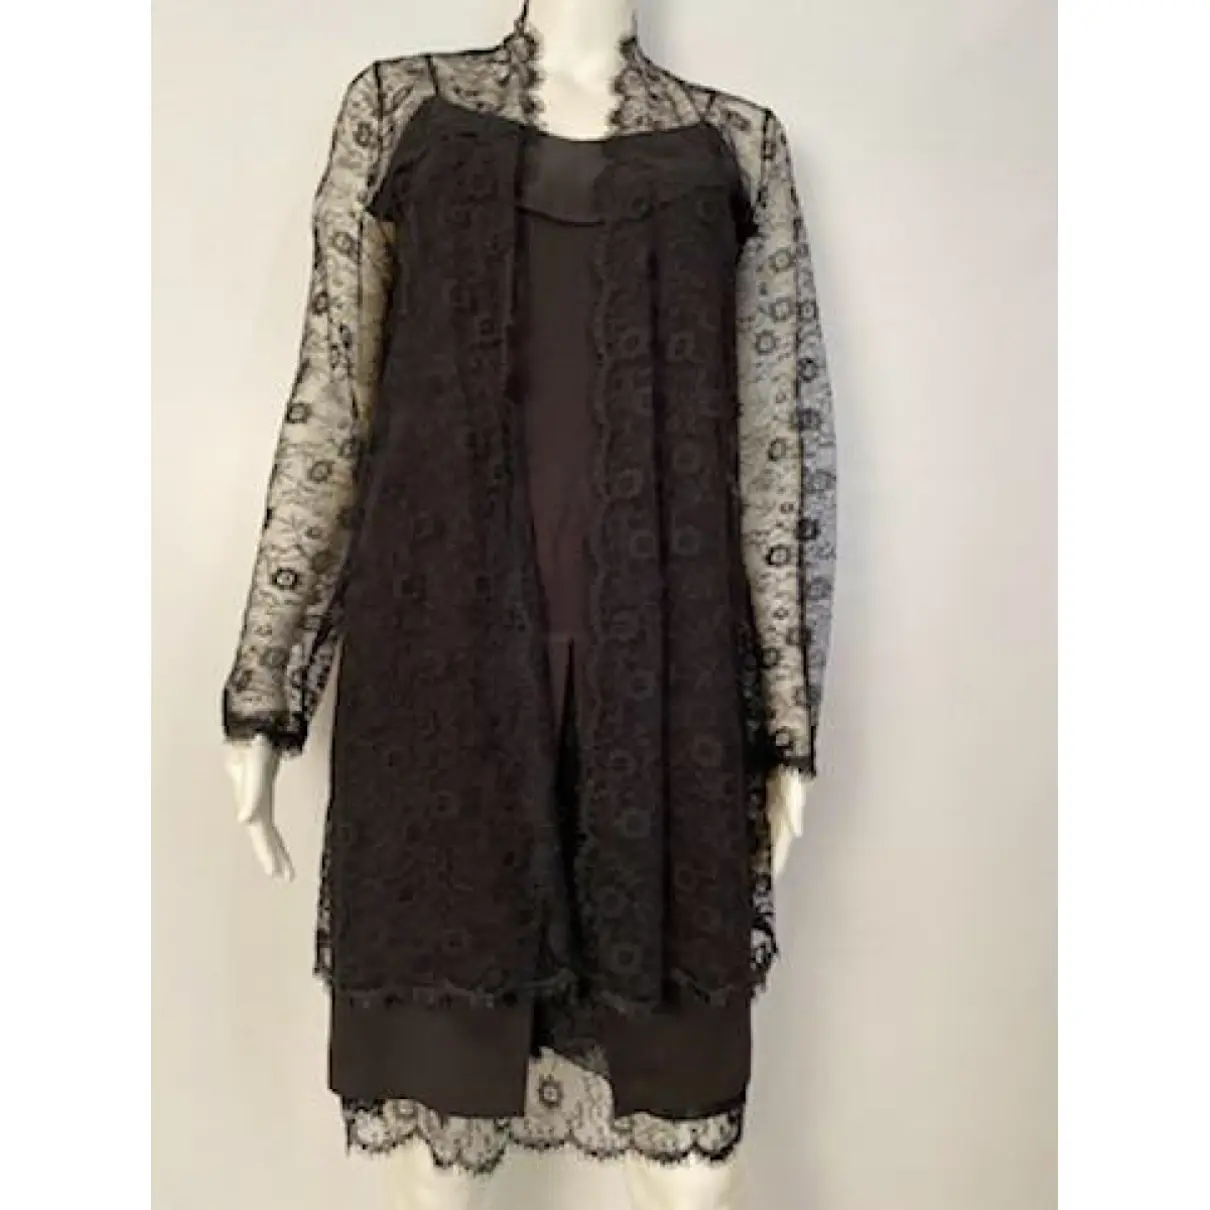 Lace mid-length dress Chanel